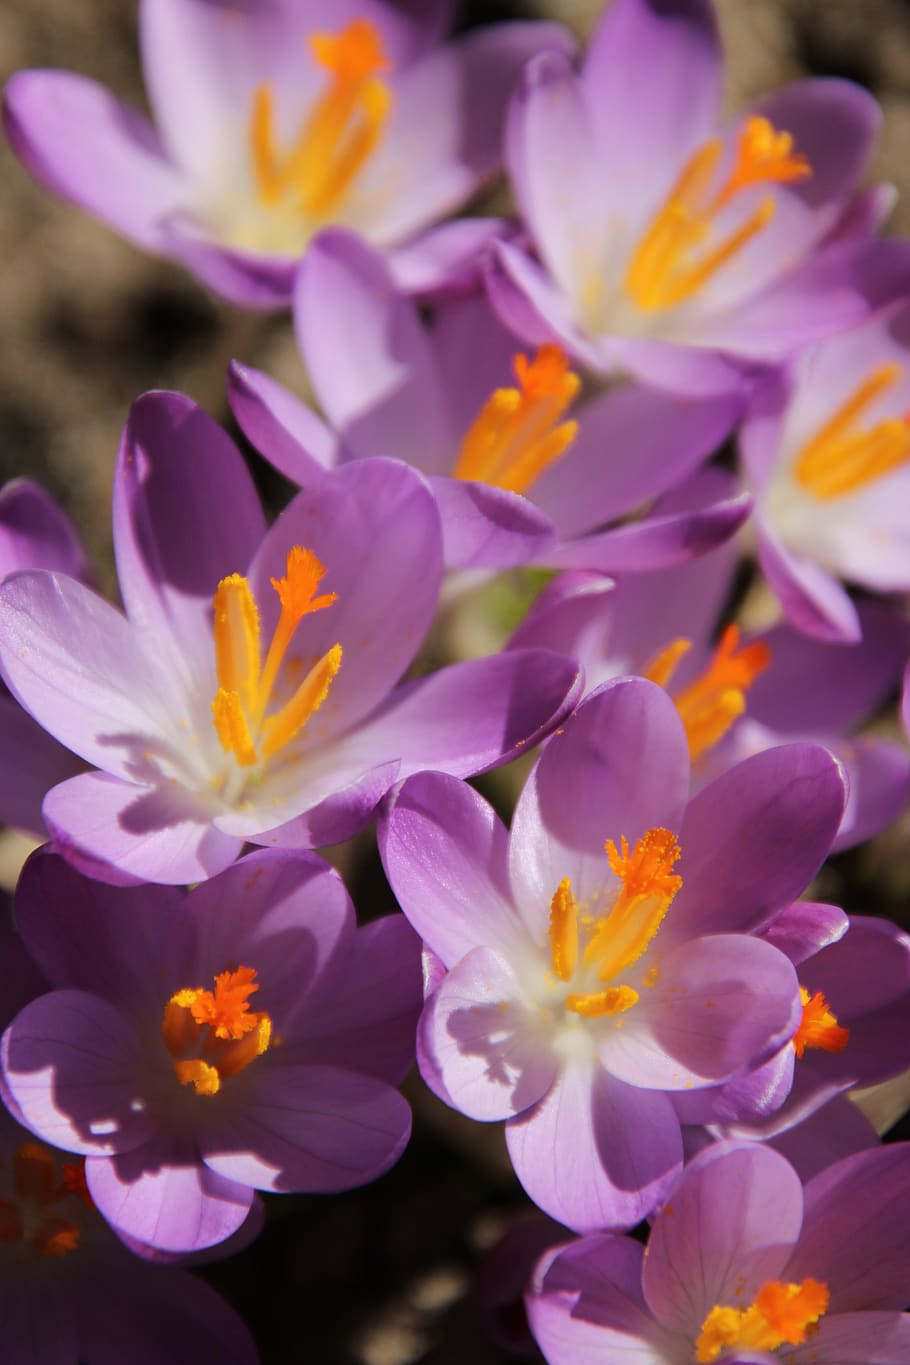 crocus, flowers, early bloomer, spring, winter, january, february, march, spring awakening, greeting card